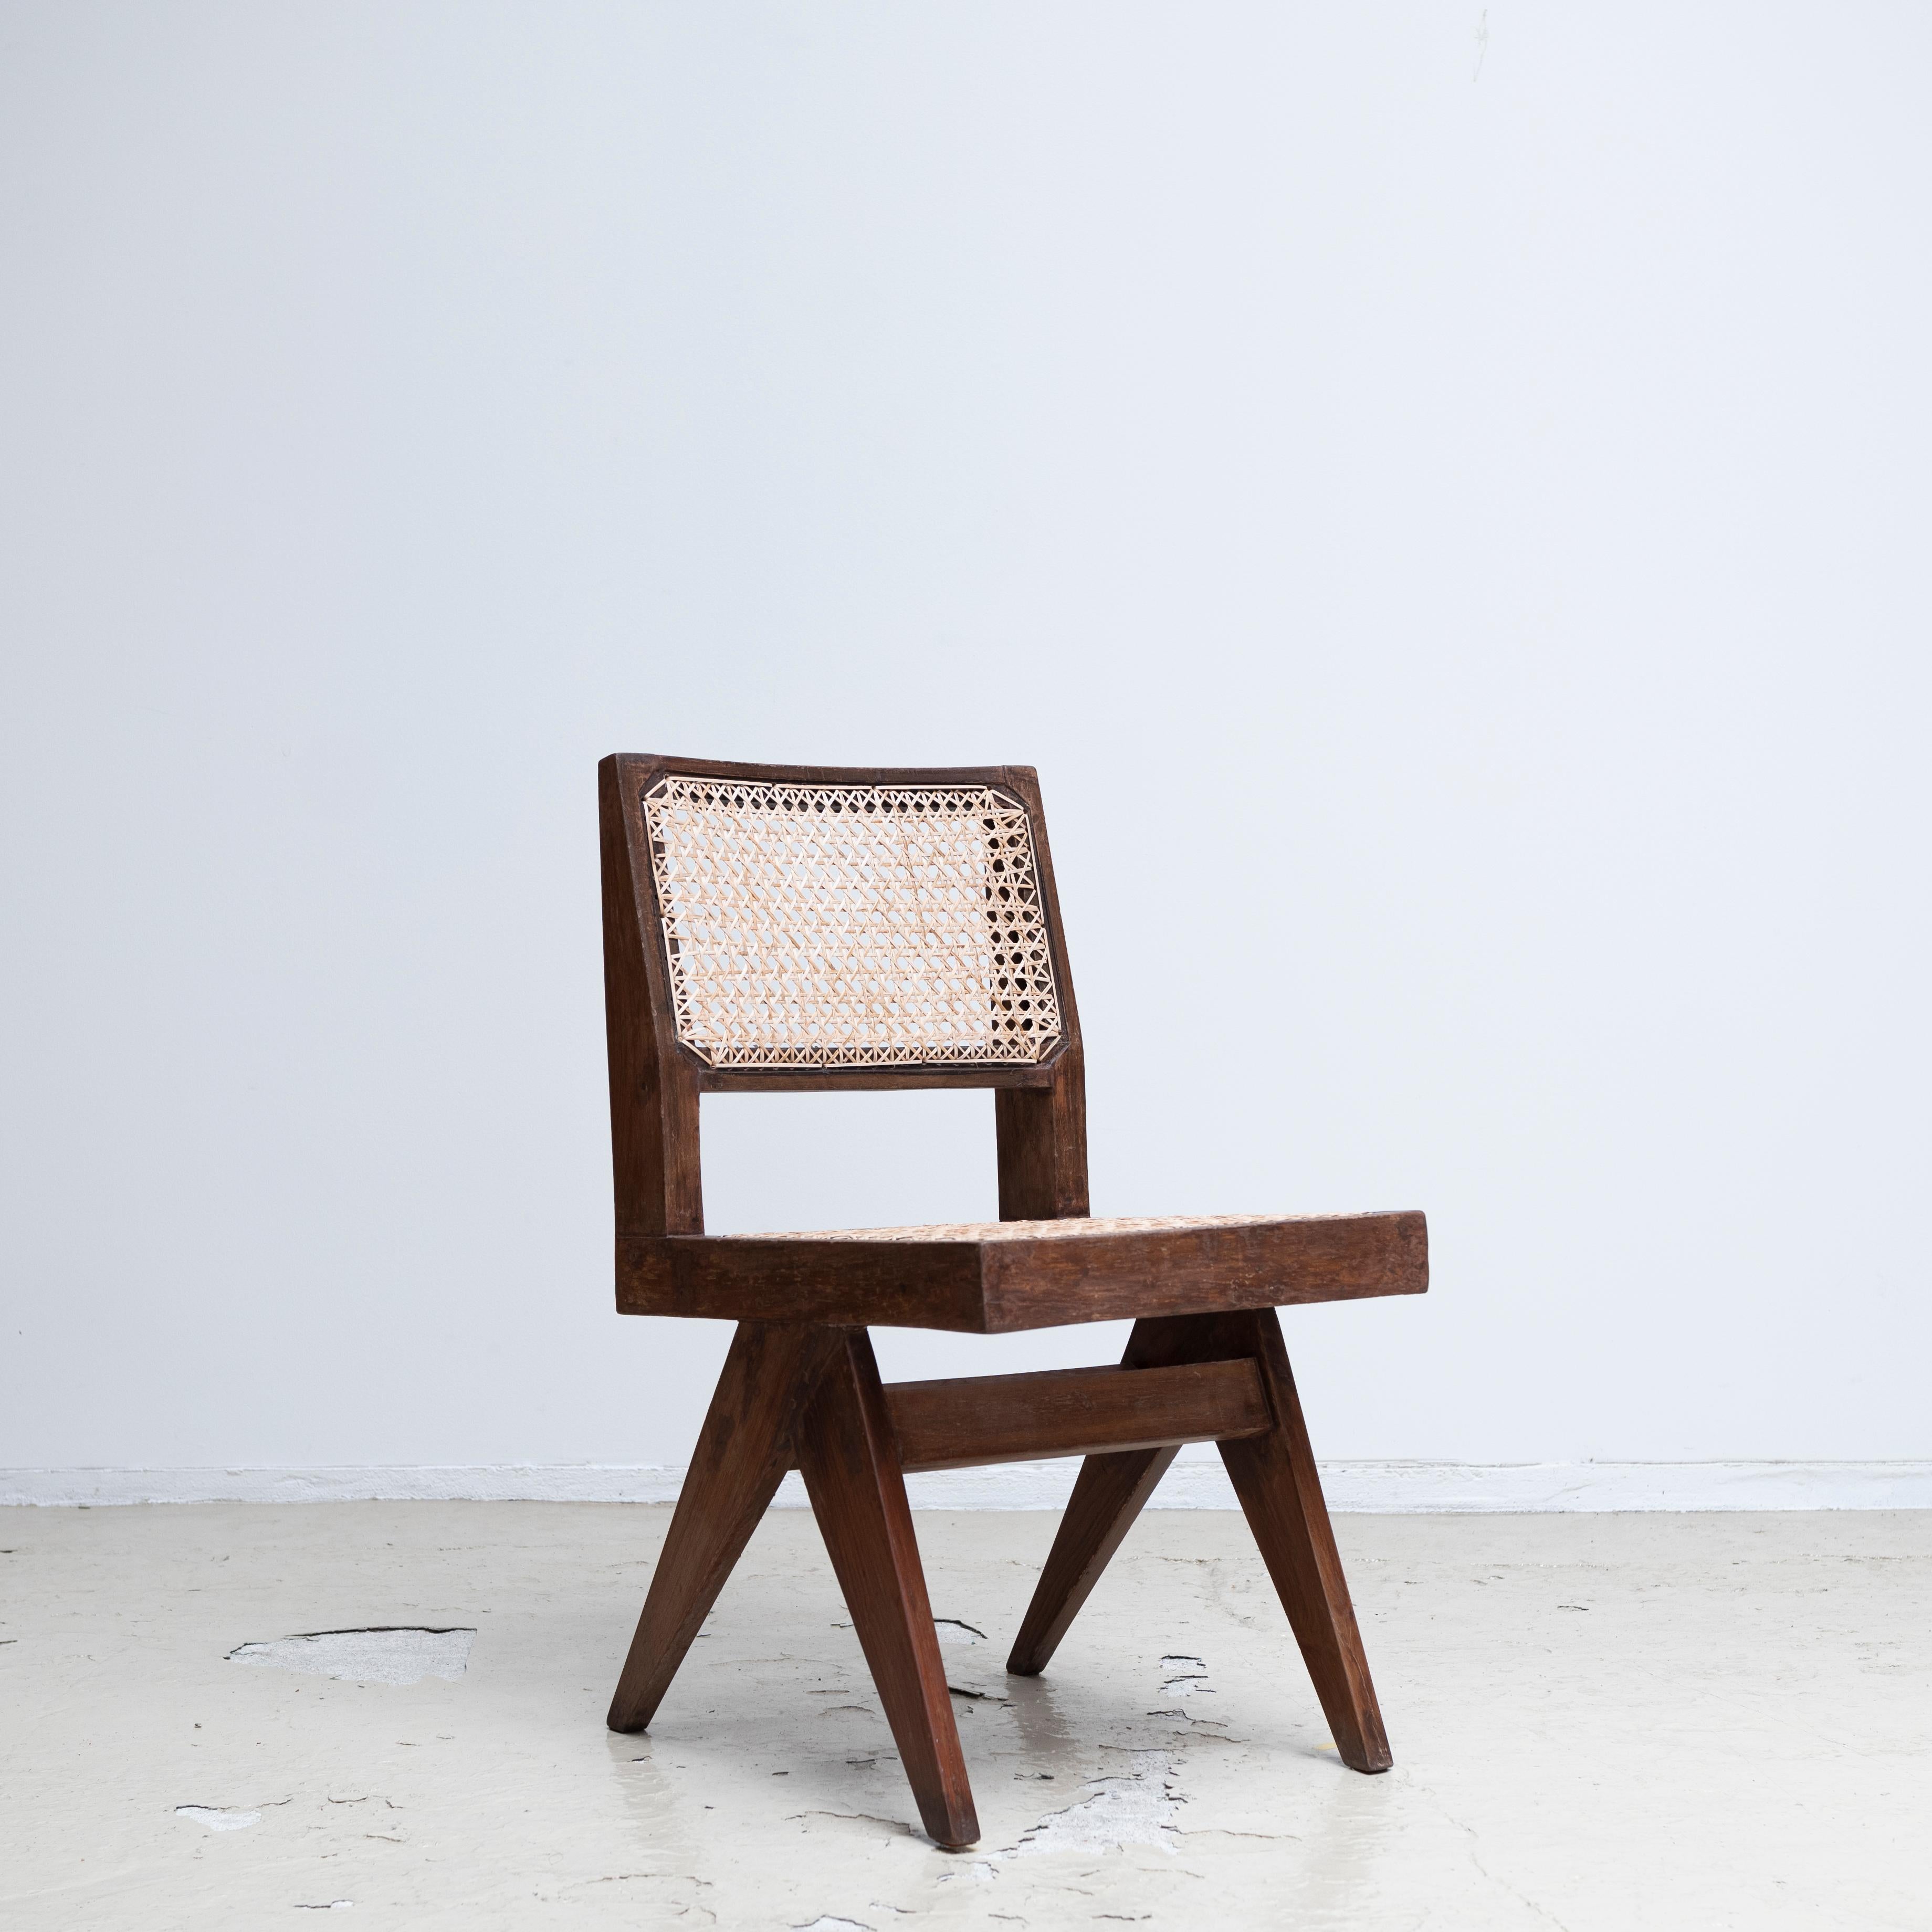 Indian Pierre Jeanneret Armless Dining Chairs, Pair, circa 1950s, Chandigarh, India